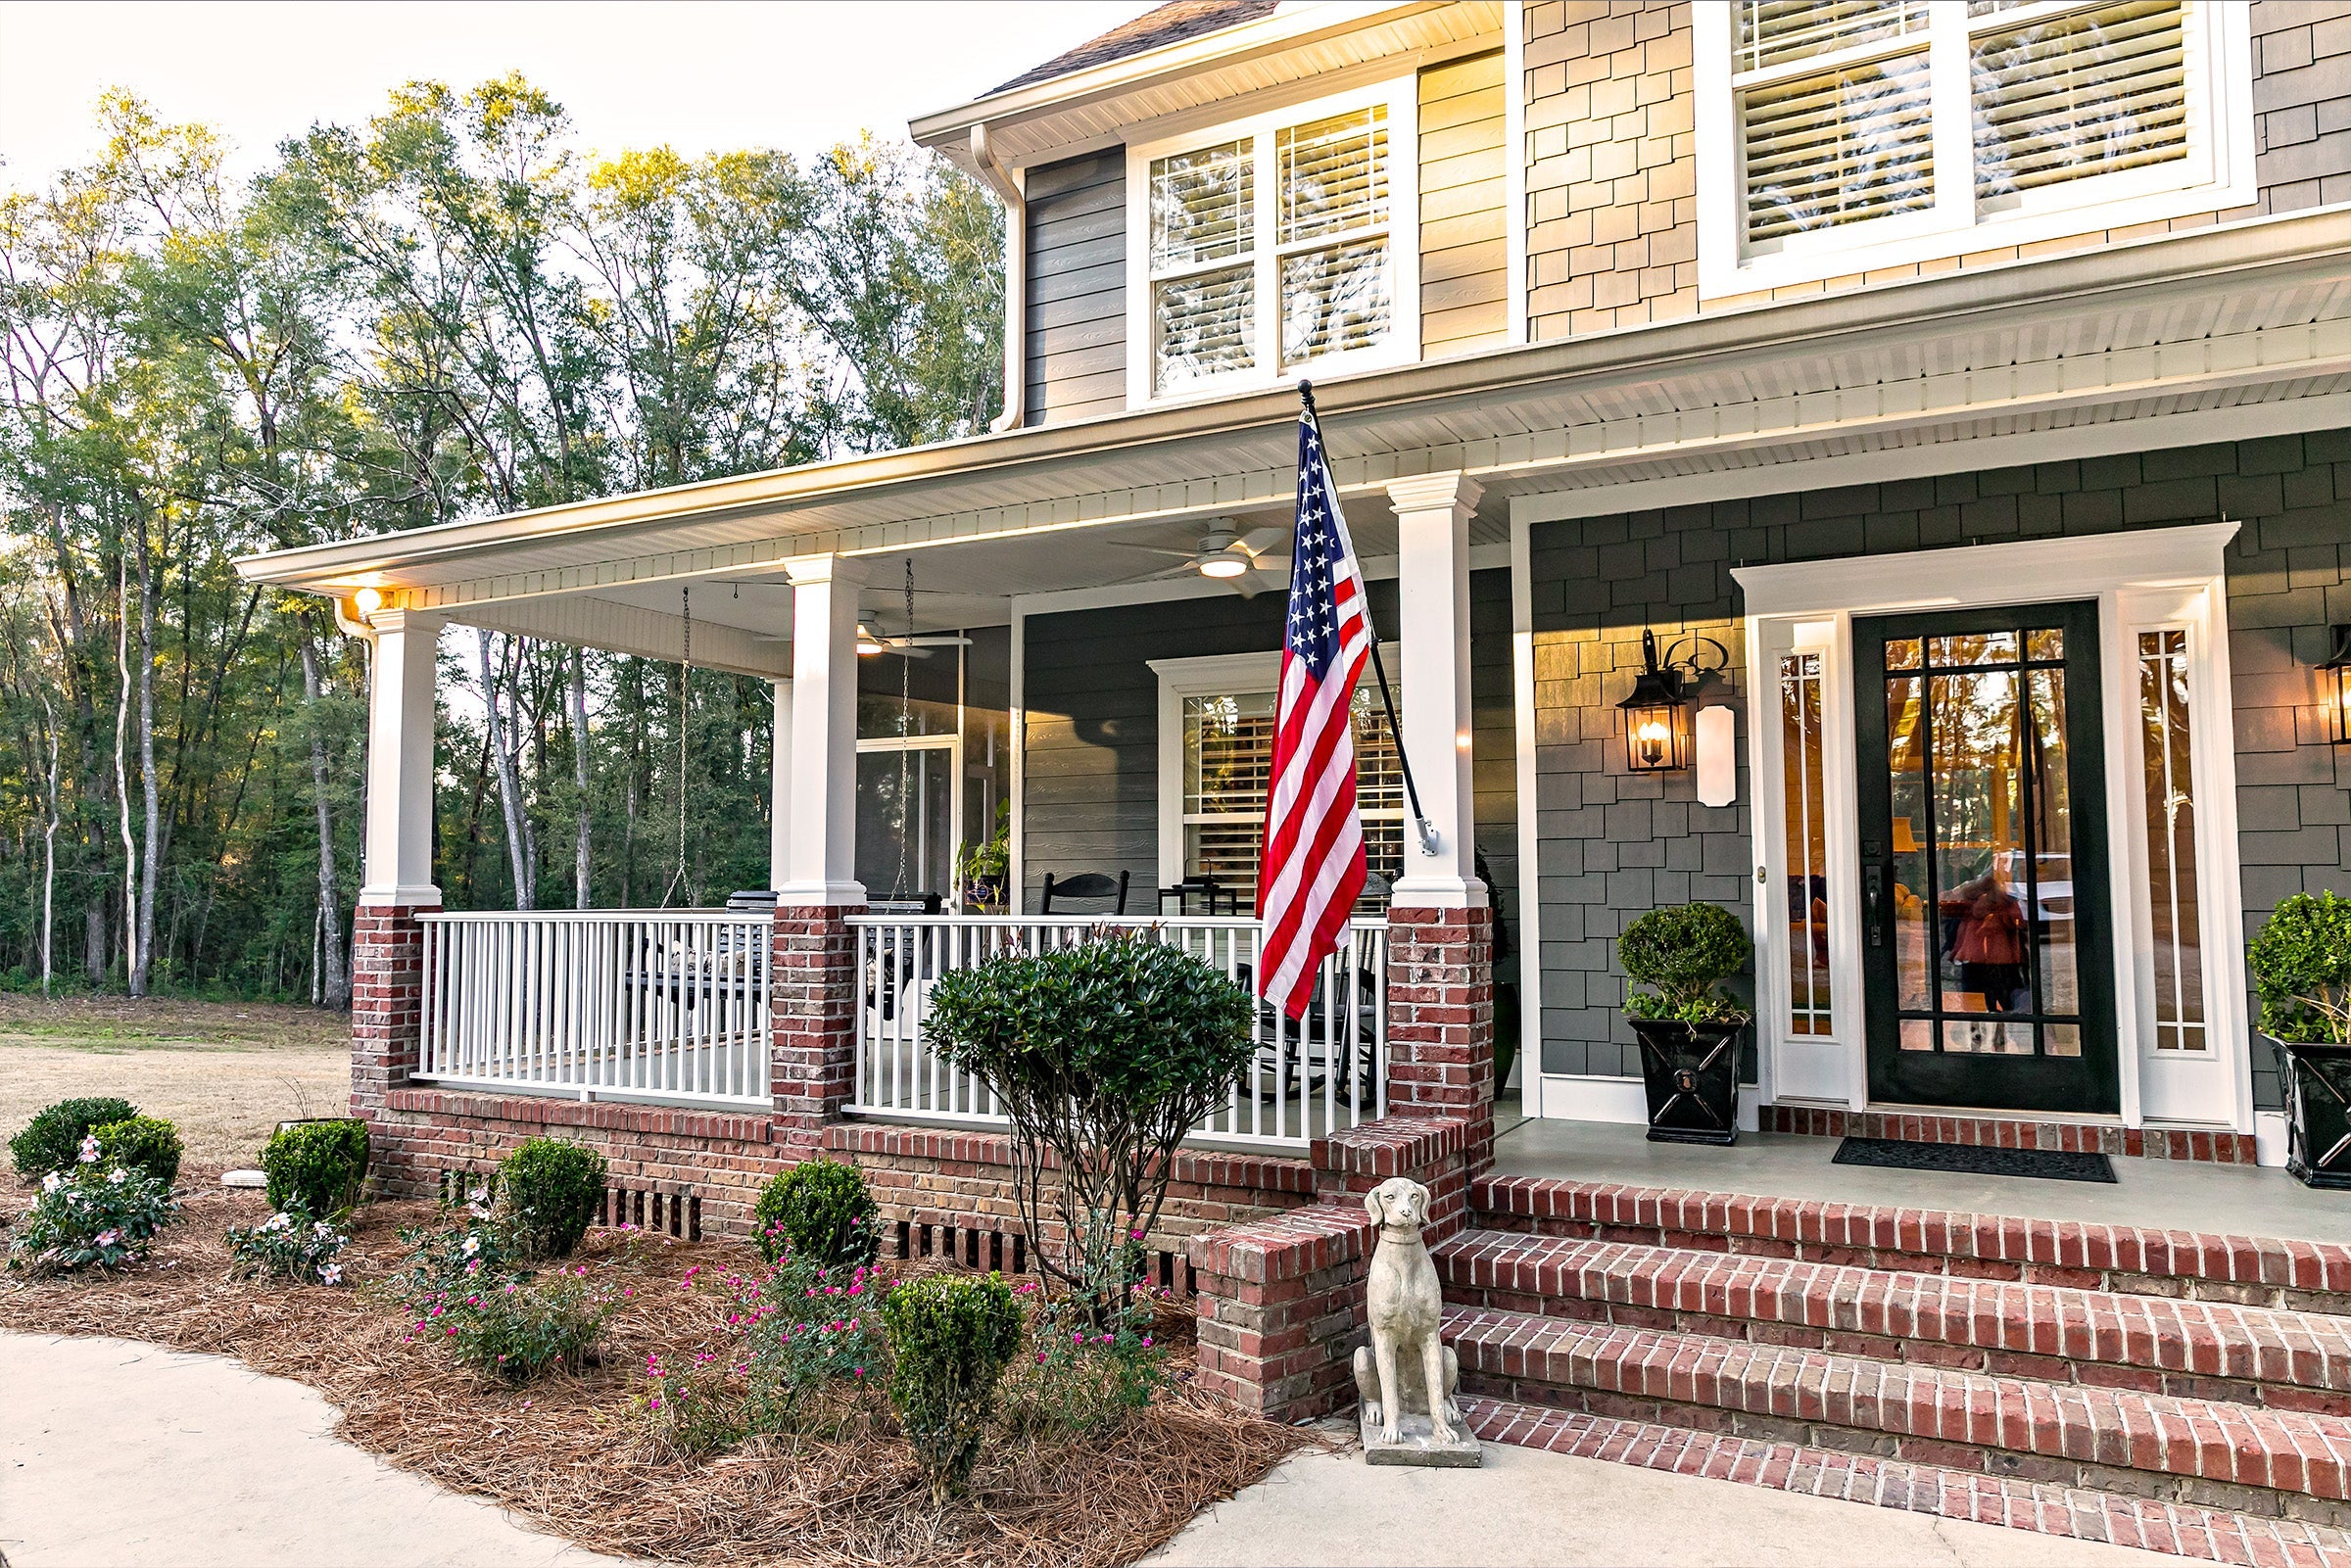 Two-story house with a large front porch, American flag, and brick steps. Hand-made bushes and flowers line the walkway. Forested area in the background.